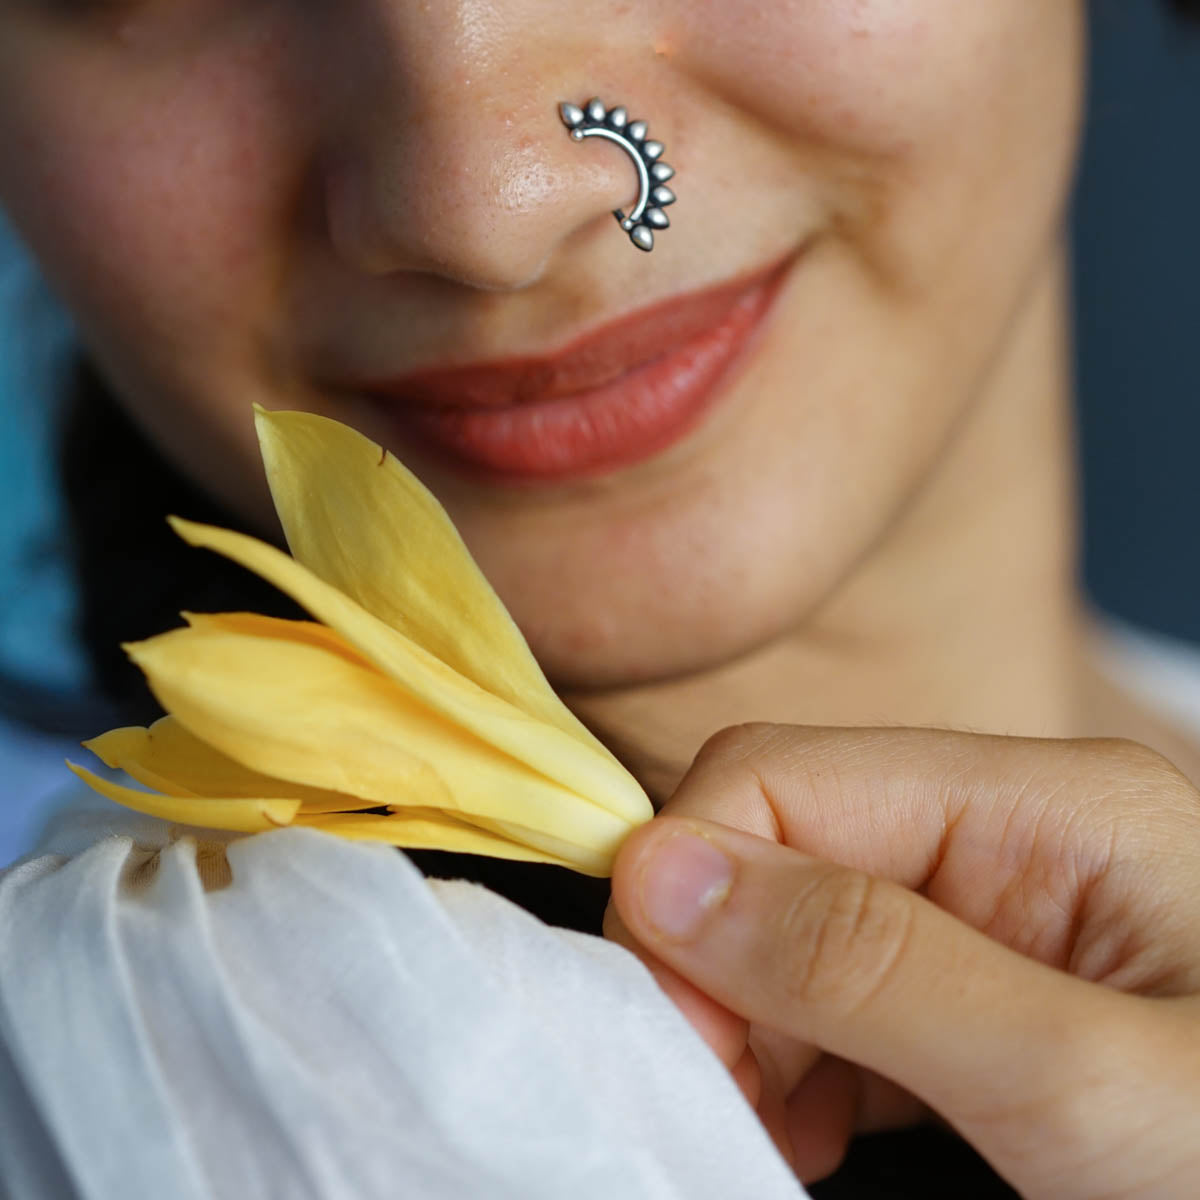 a woman with a nose piercing holding a flower